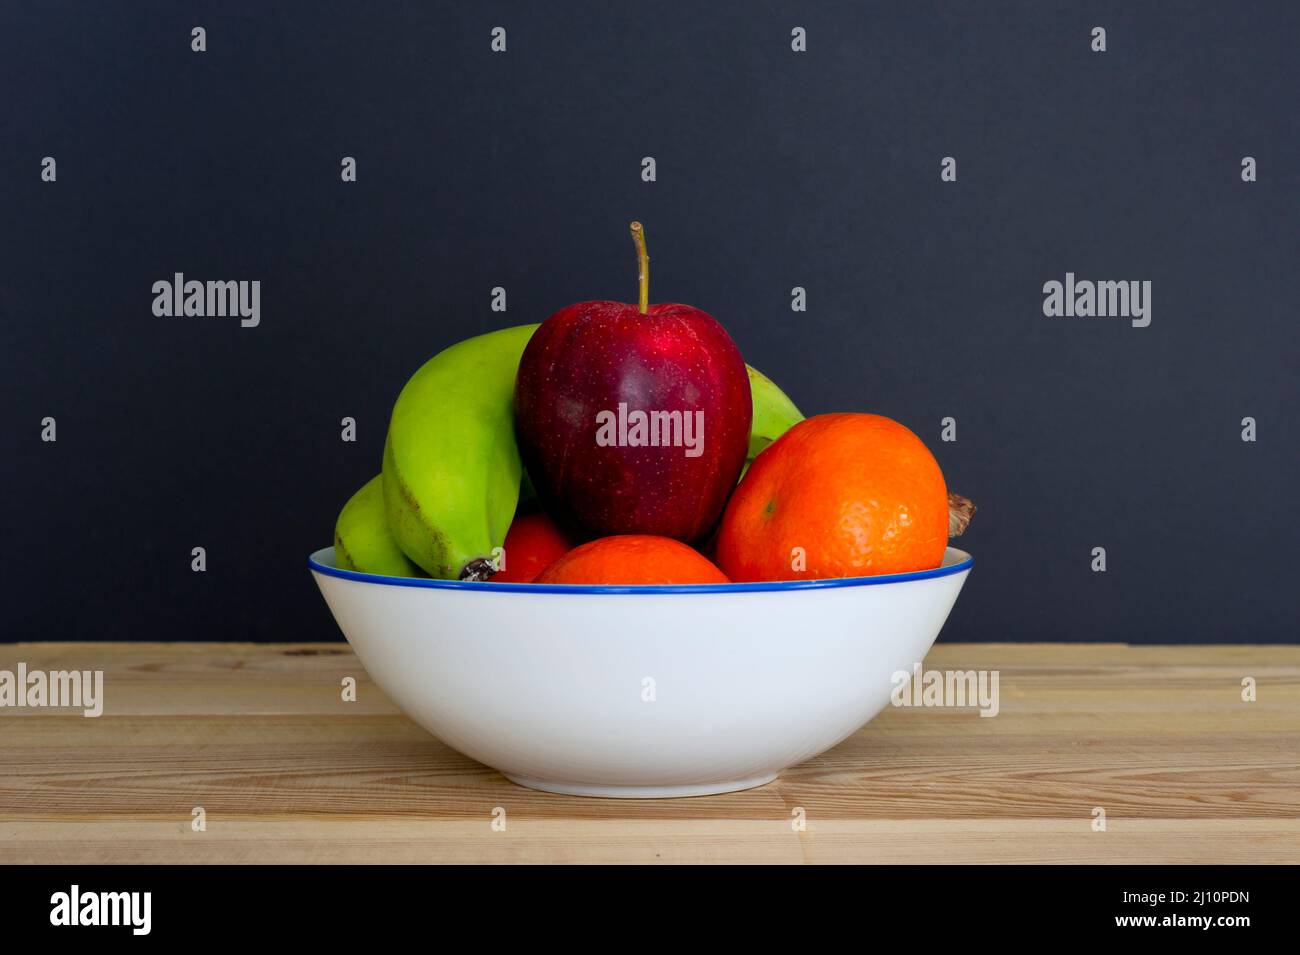 Bananas, apples and oranges in a bowl on a table. Stock Photo